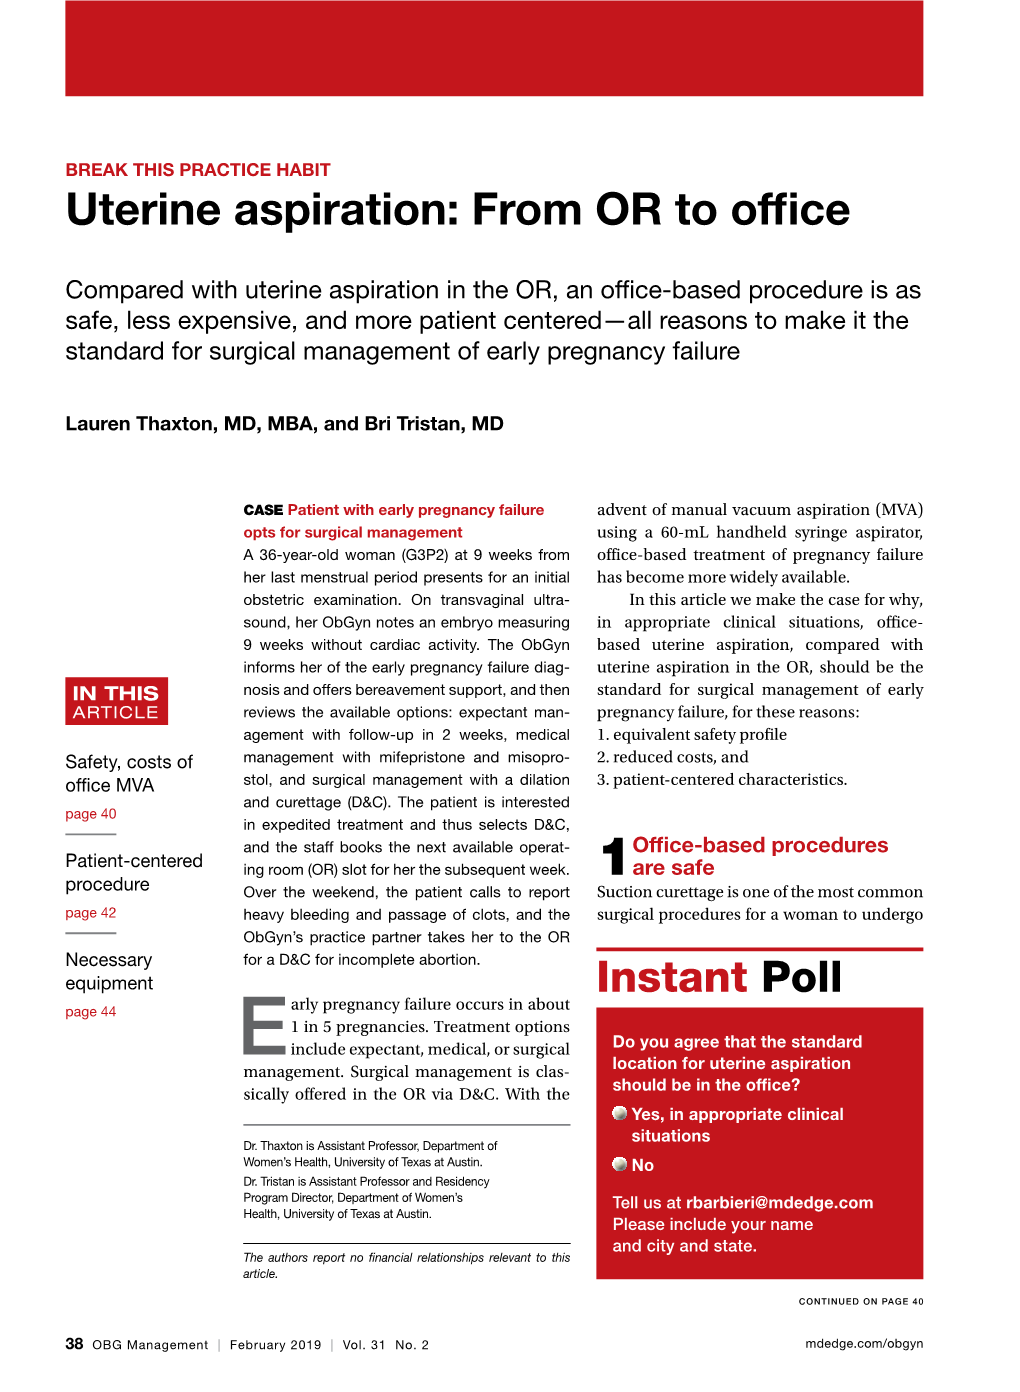 Uterine Aspiration: from OR to Office